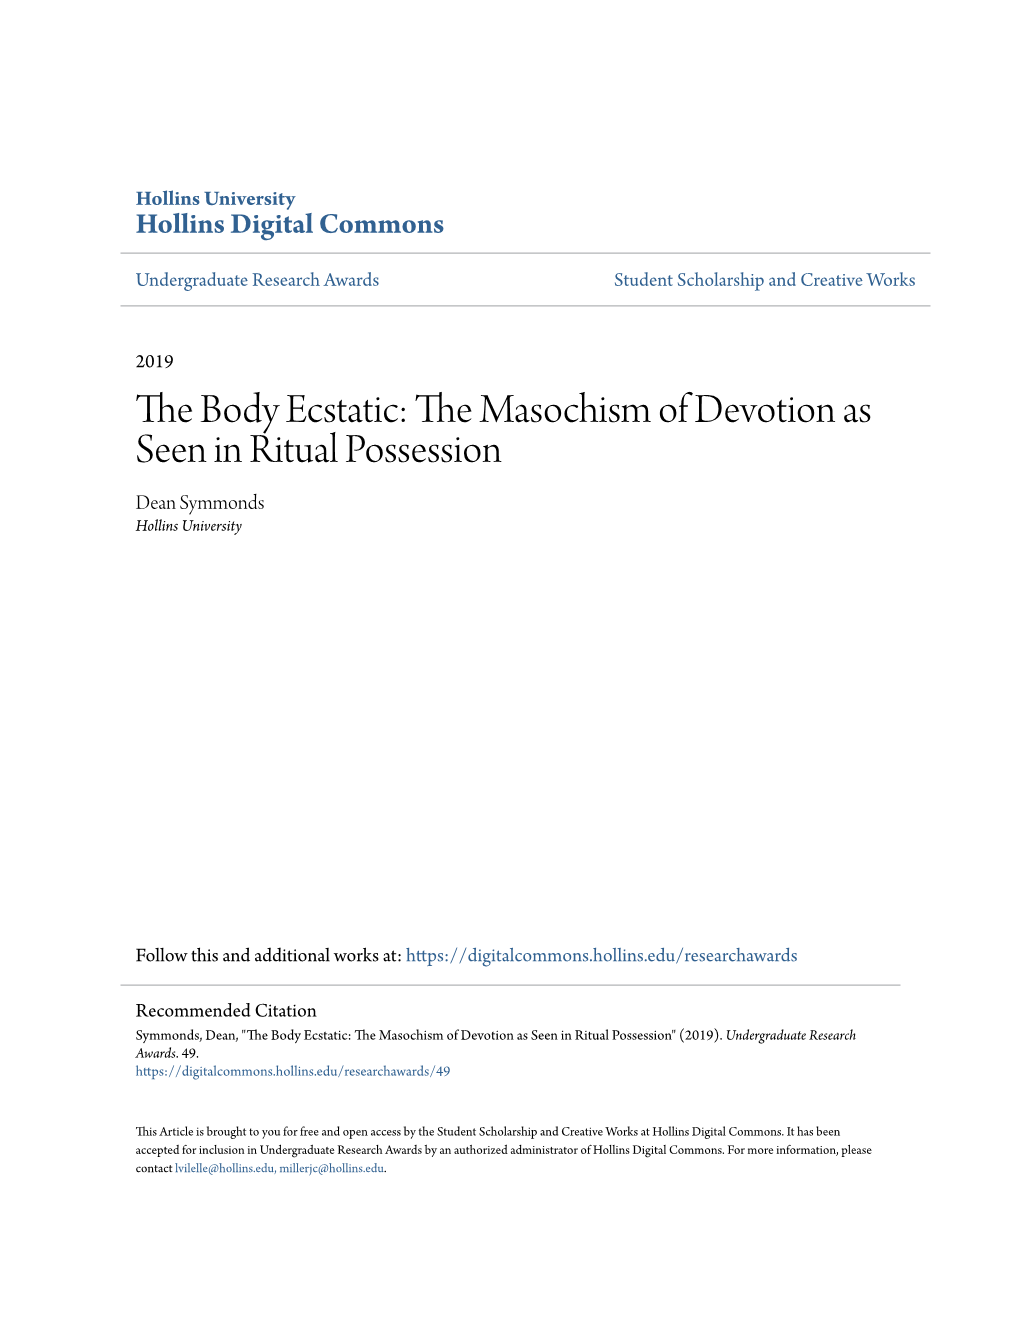 The Masochism of Devotion As Seen in Ritual Possession